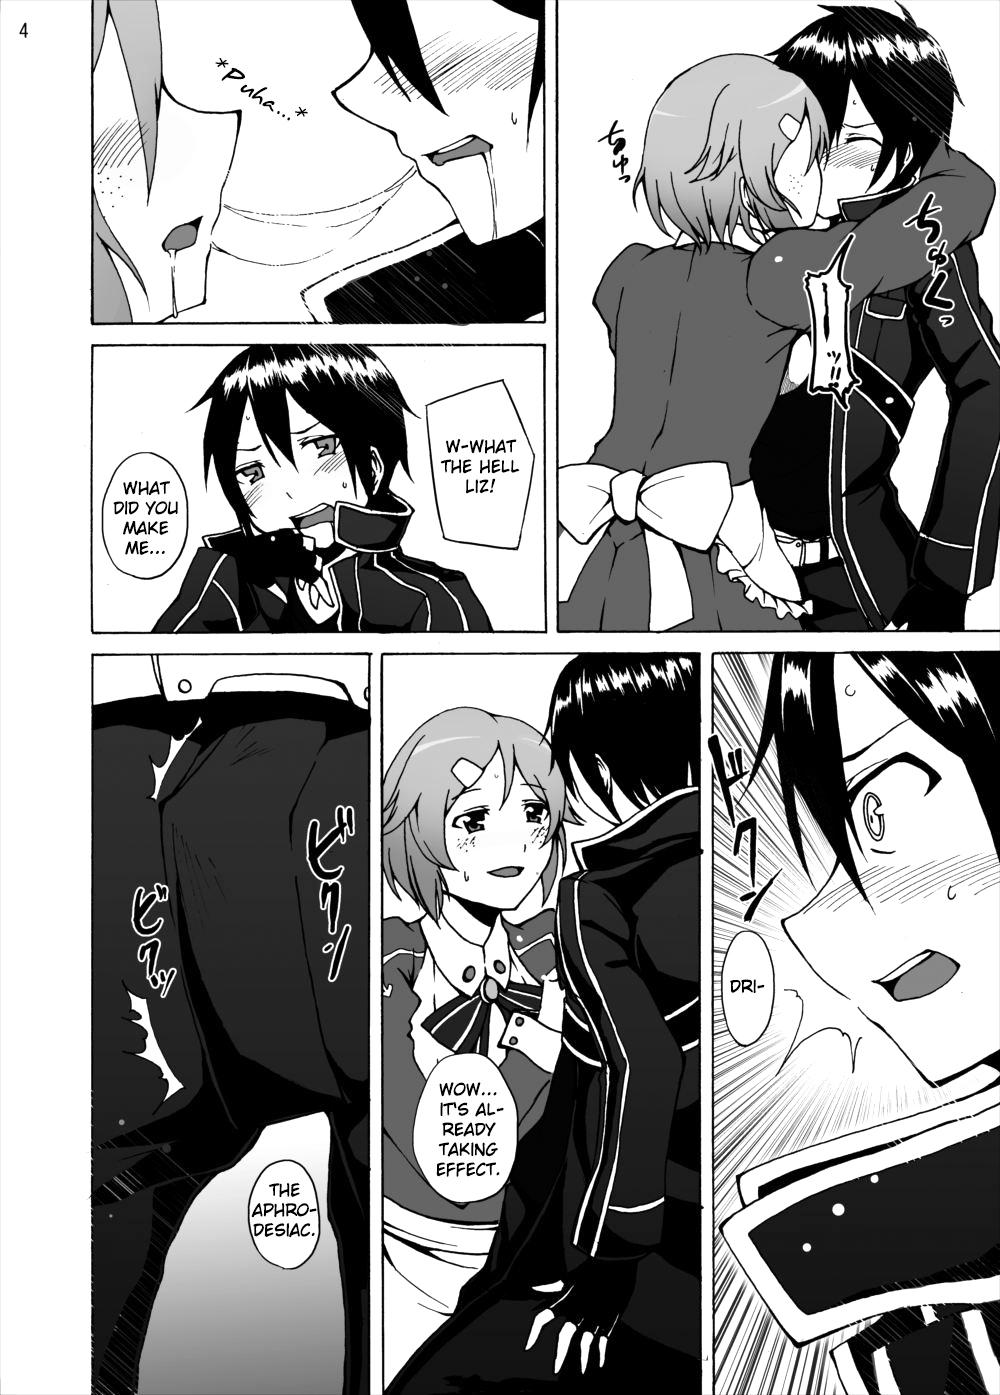 Secretary Lisbeth's Decision...To Steal Kirito From Asuna Even if She Has to Use a Dangerous Drug - Sword art online Jerk Off Instruction - Page 4